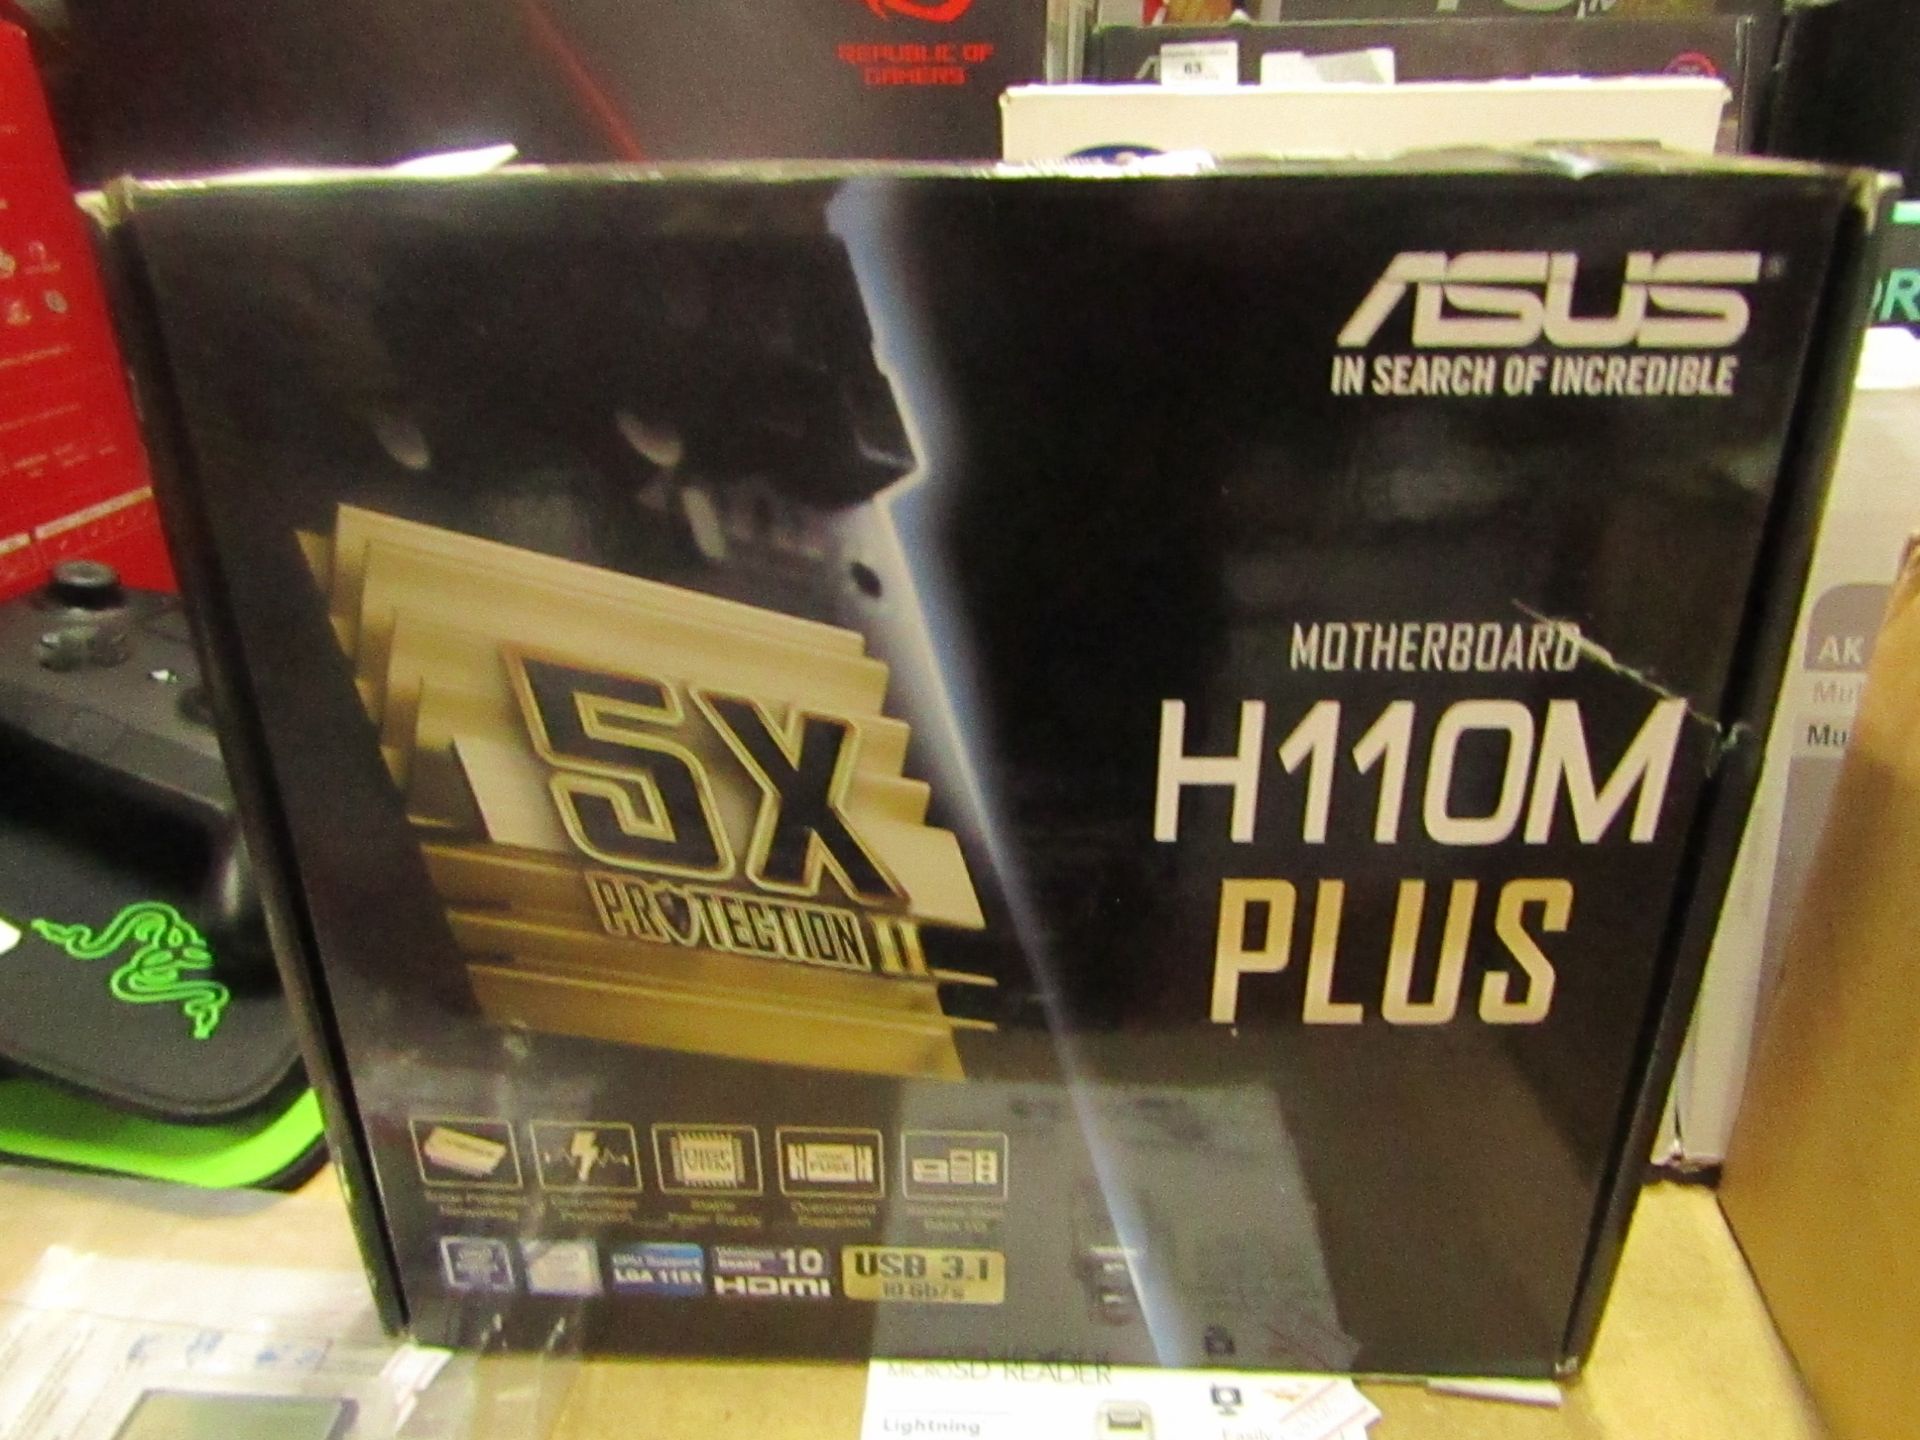 Asus H110M Plus motherboard, untested and boxed.